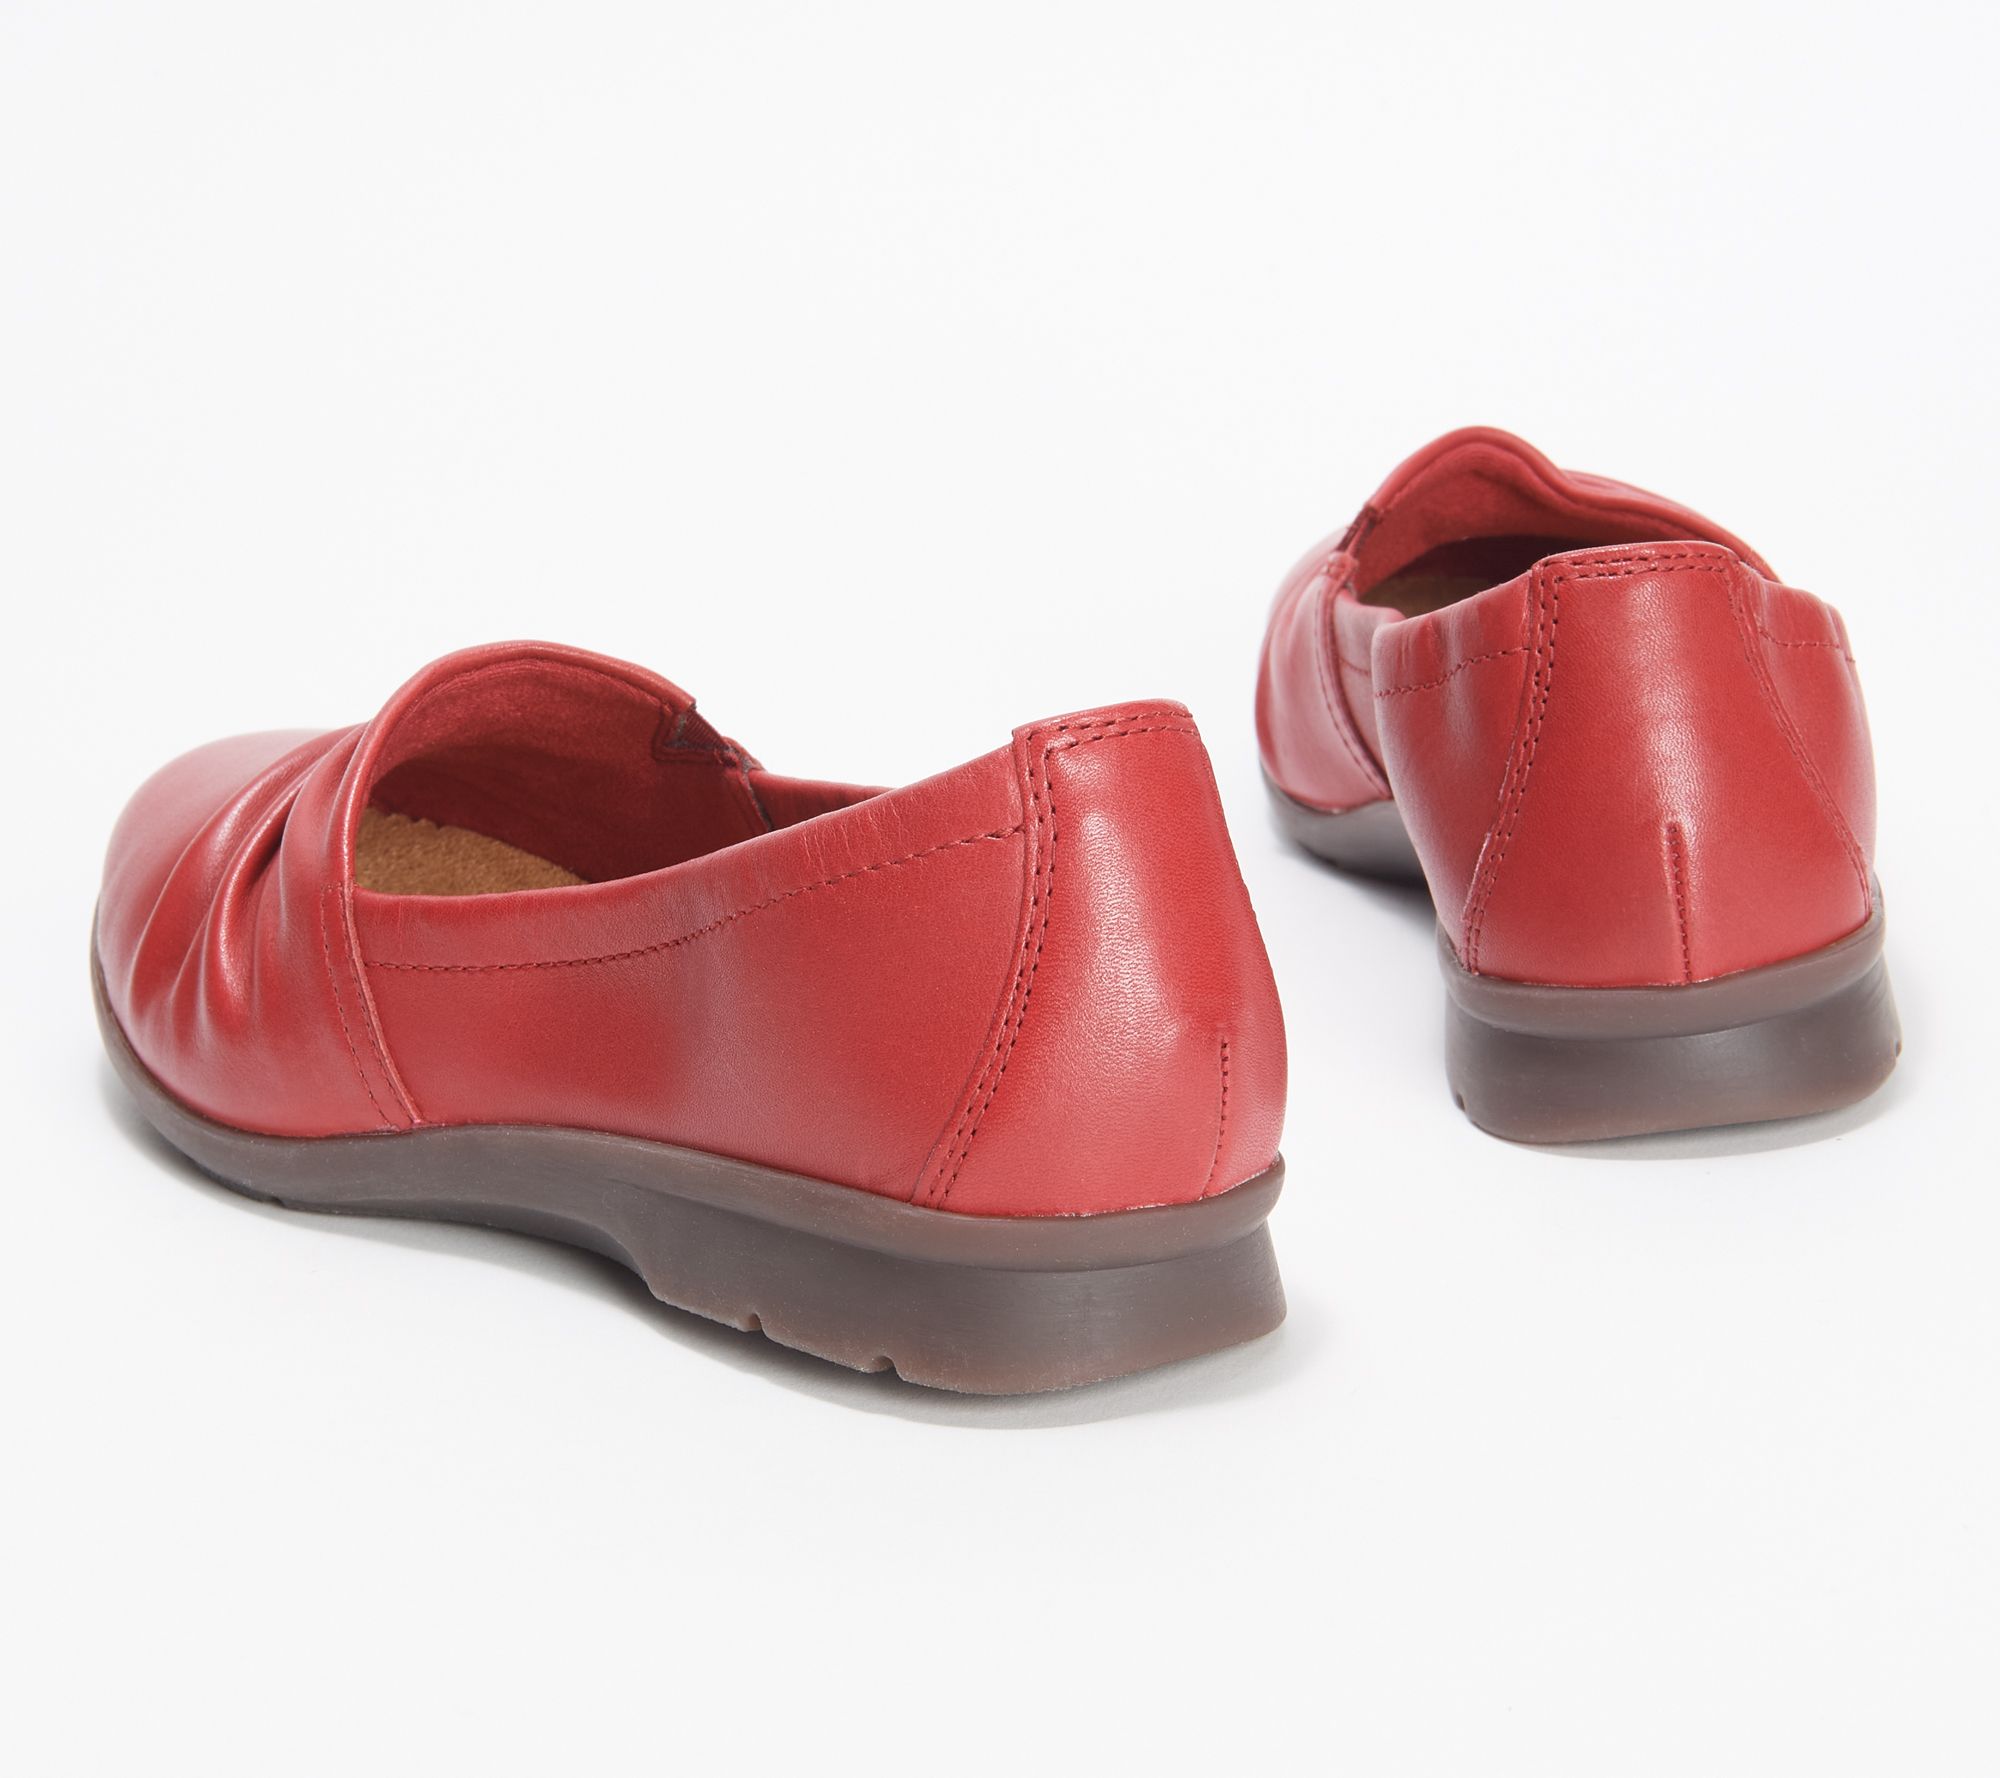 Clarks Collection Rouched - Jenette Ruby - QVC.com